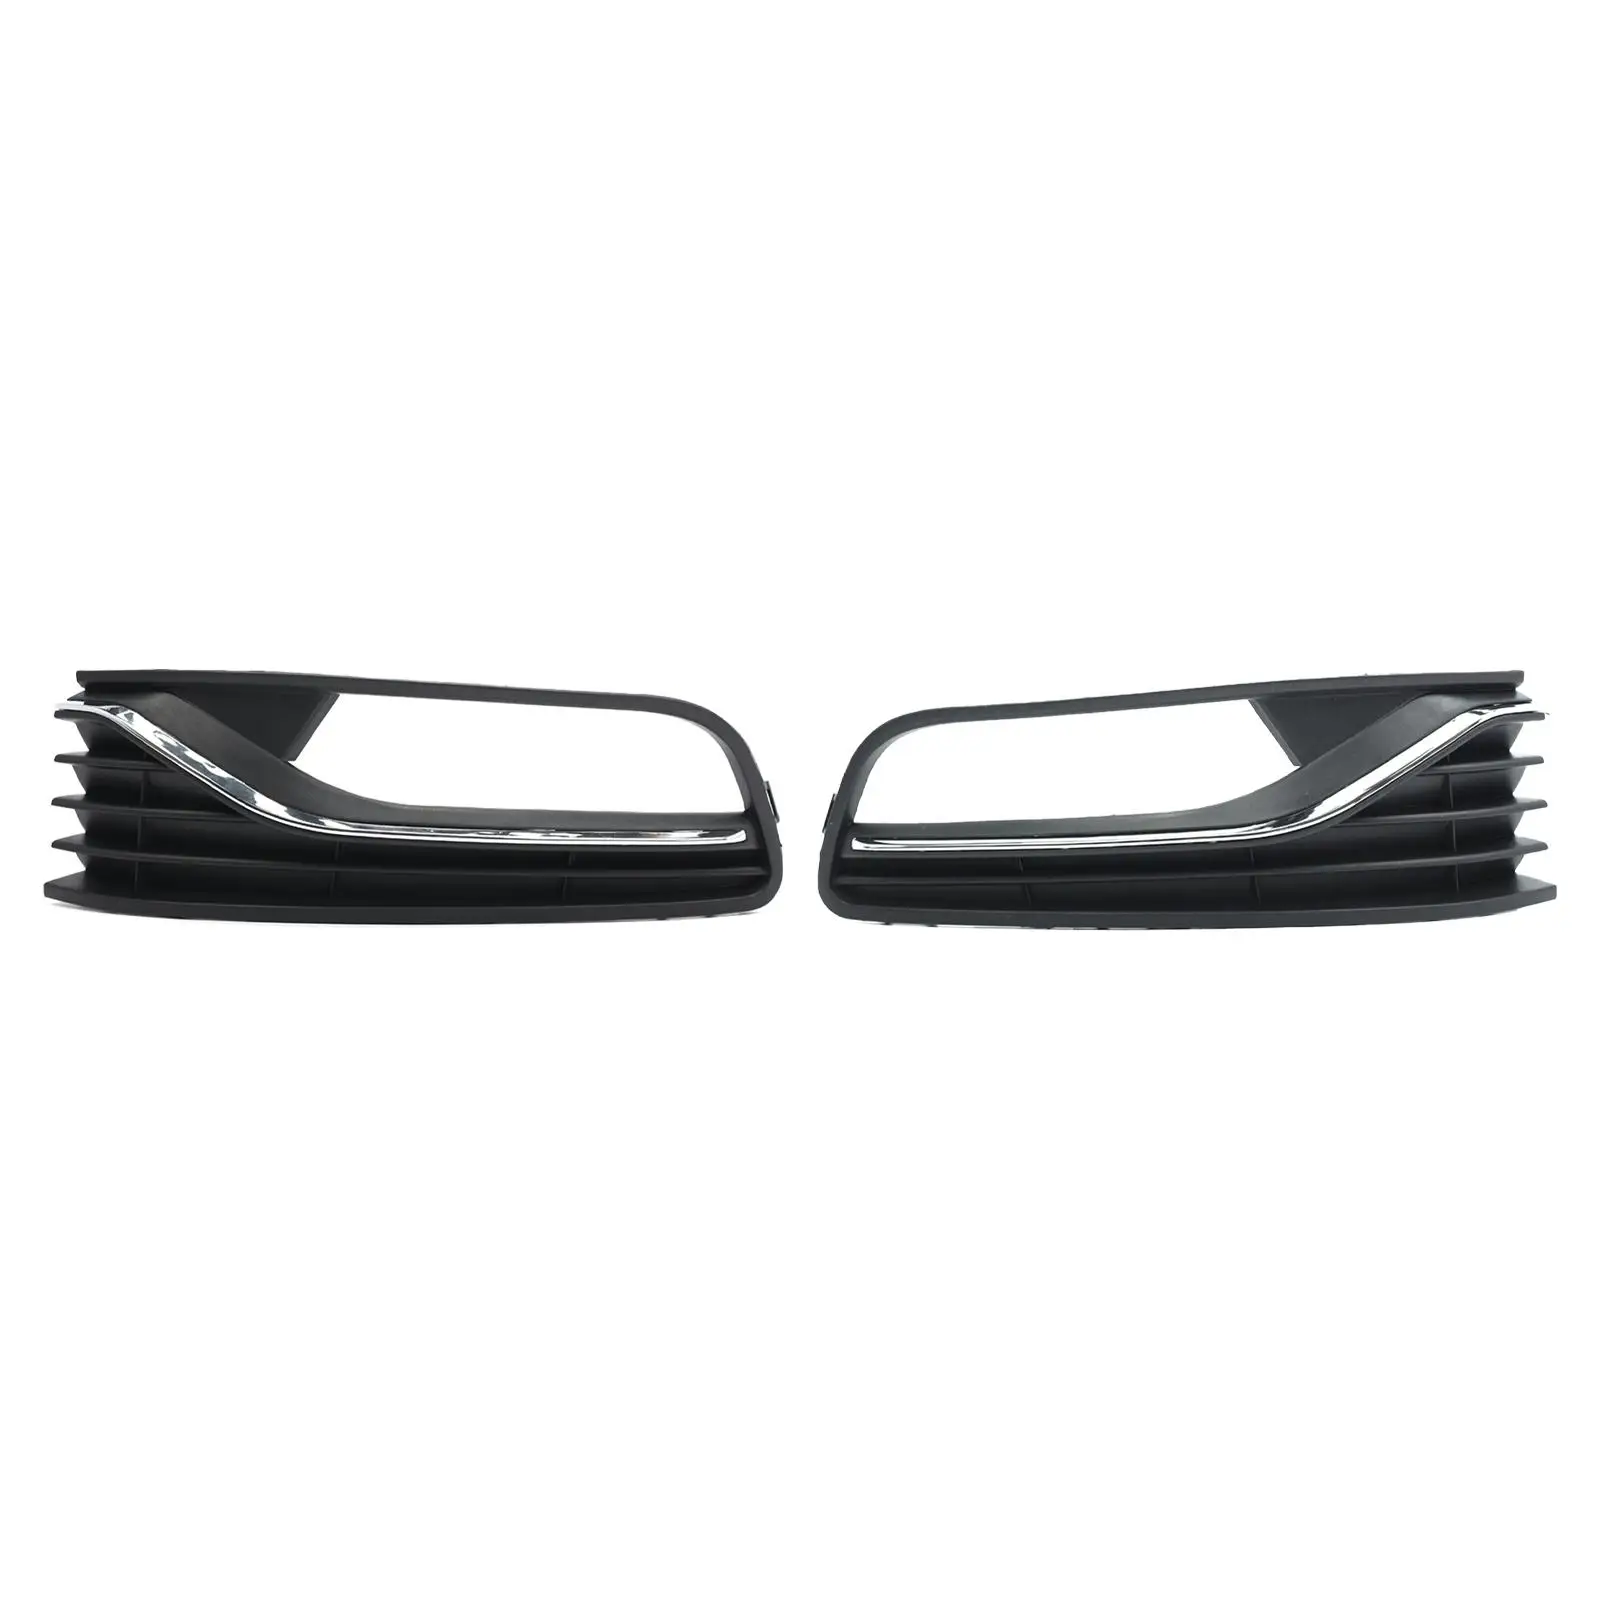 Fog Light Cover Grille Professional Front Bumper Fog Light Grill for VW Polo 6R 2014-2017 Upgrade Repair Modification Parts